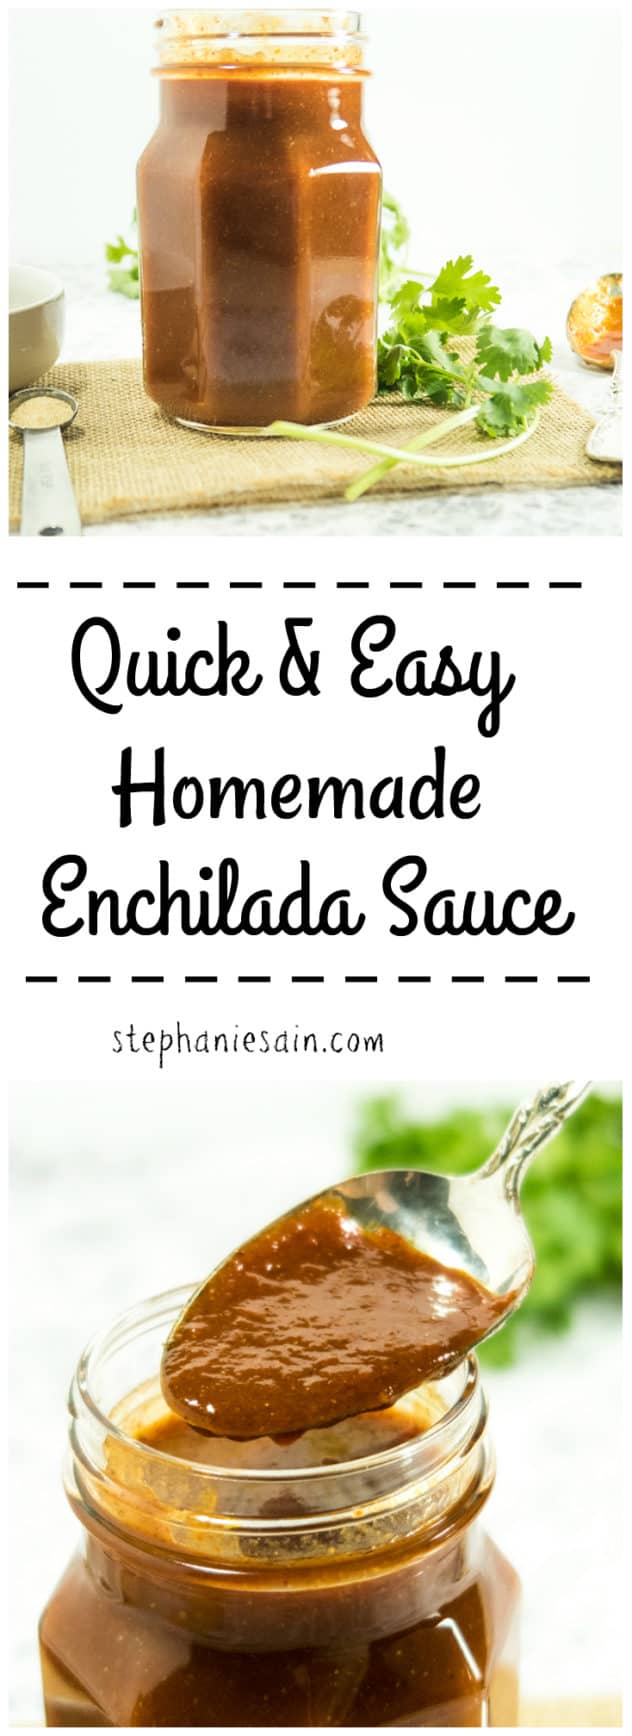 Quick & Easy Homemade Enchilada Sauce is so easy to prepare and tastes so much better than the store bought stuff. Great with all your favorite Mexican recipes. Gluten free & Vegetarian.